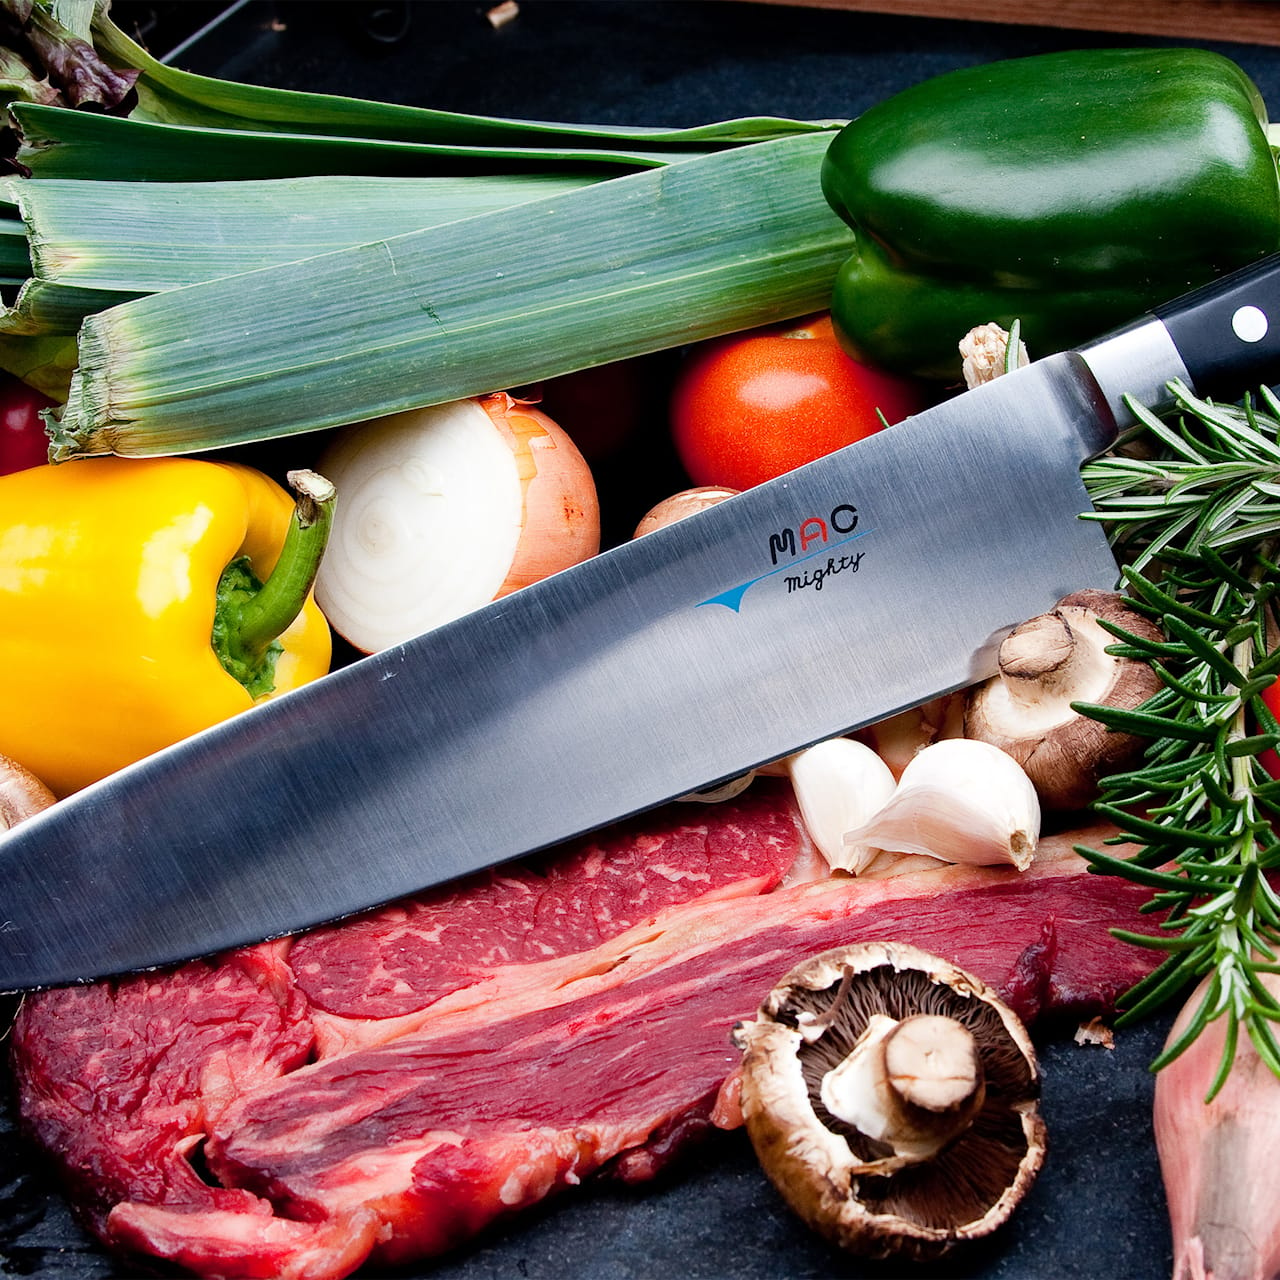 Mighty Chef's knife 22 cm